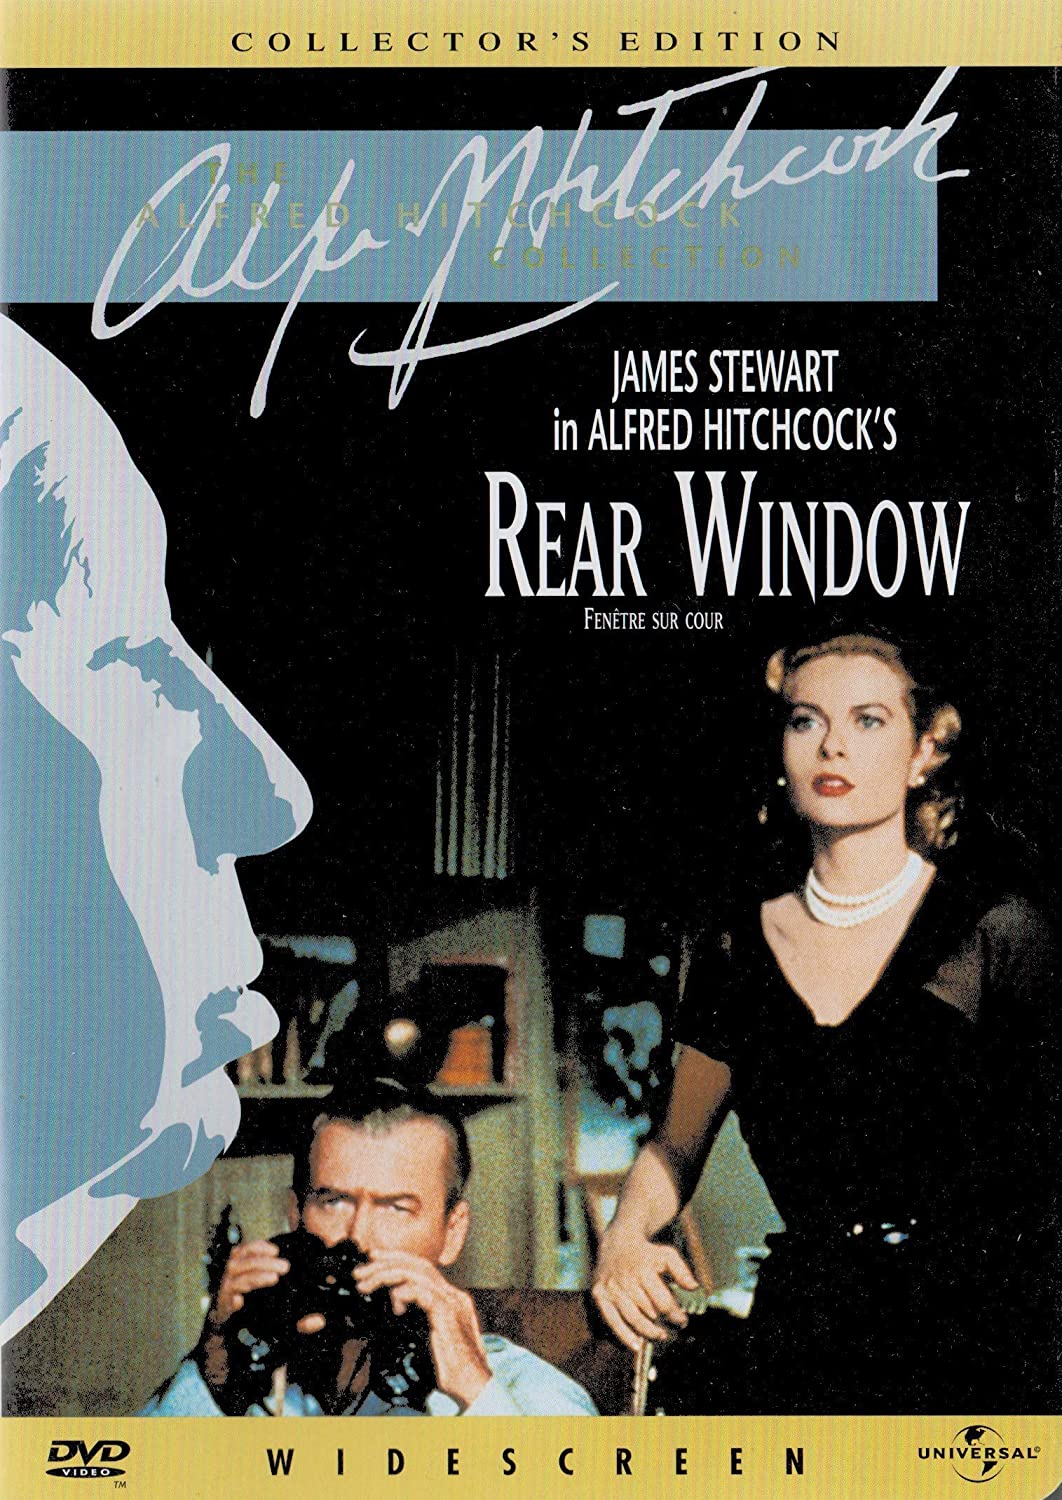 Cover art for Rear Window by Alfred Hitchcock